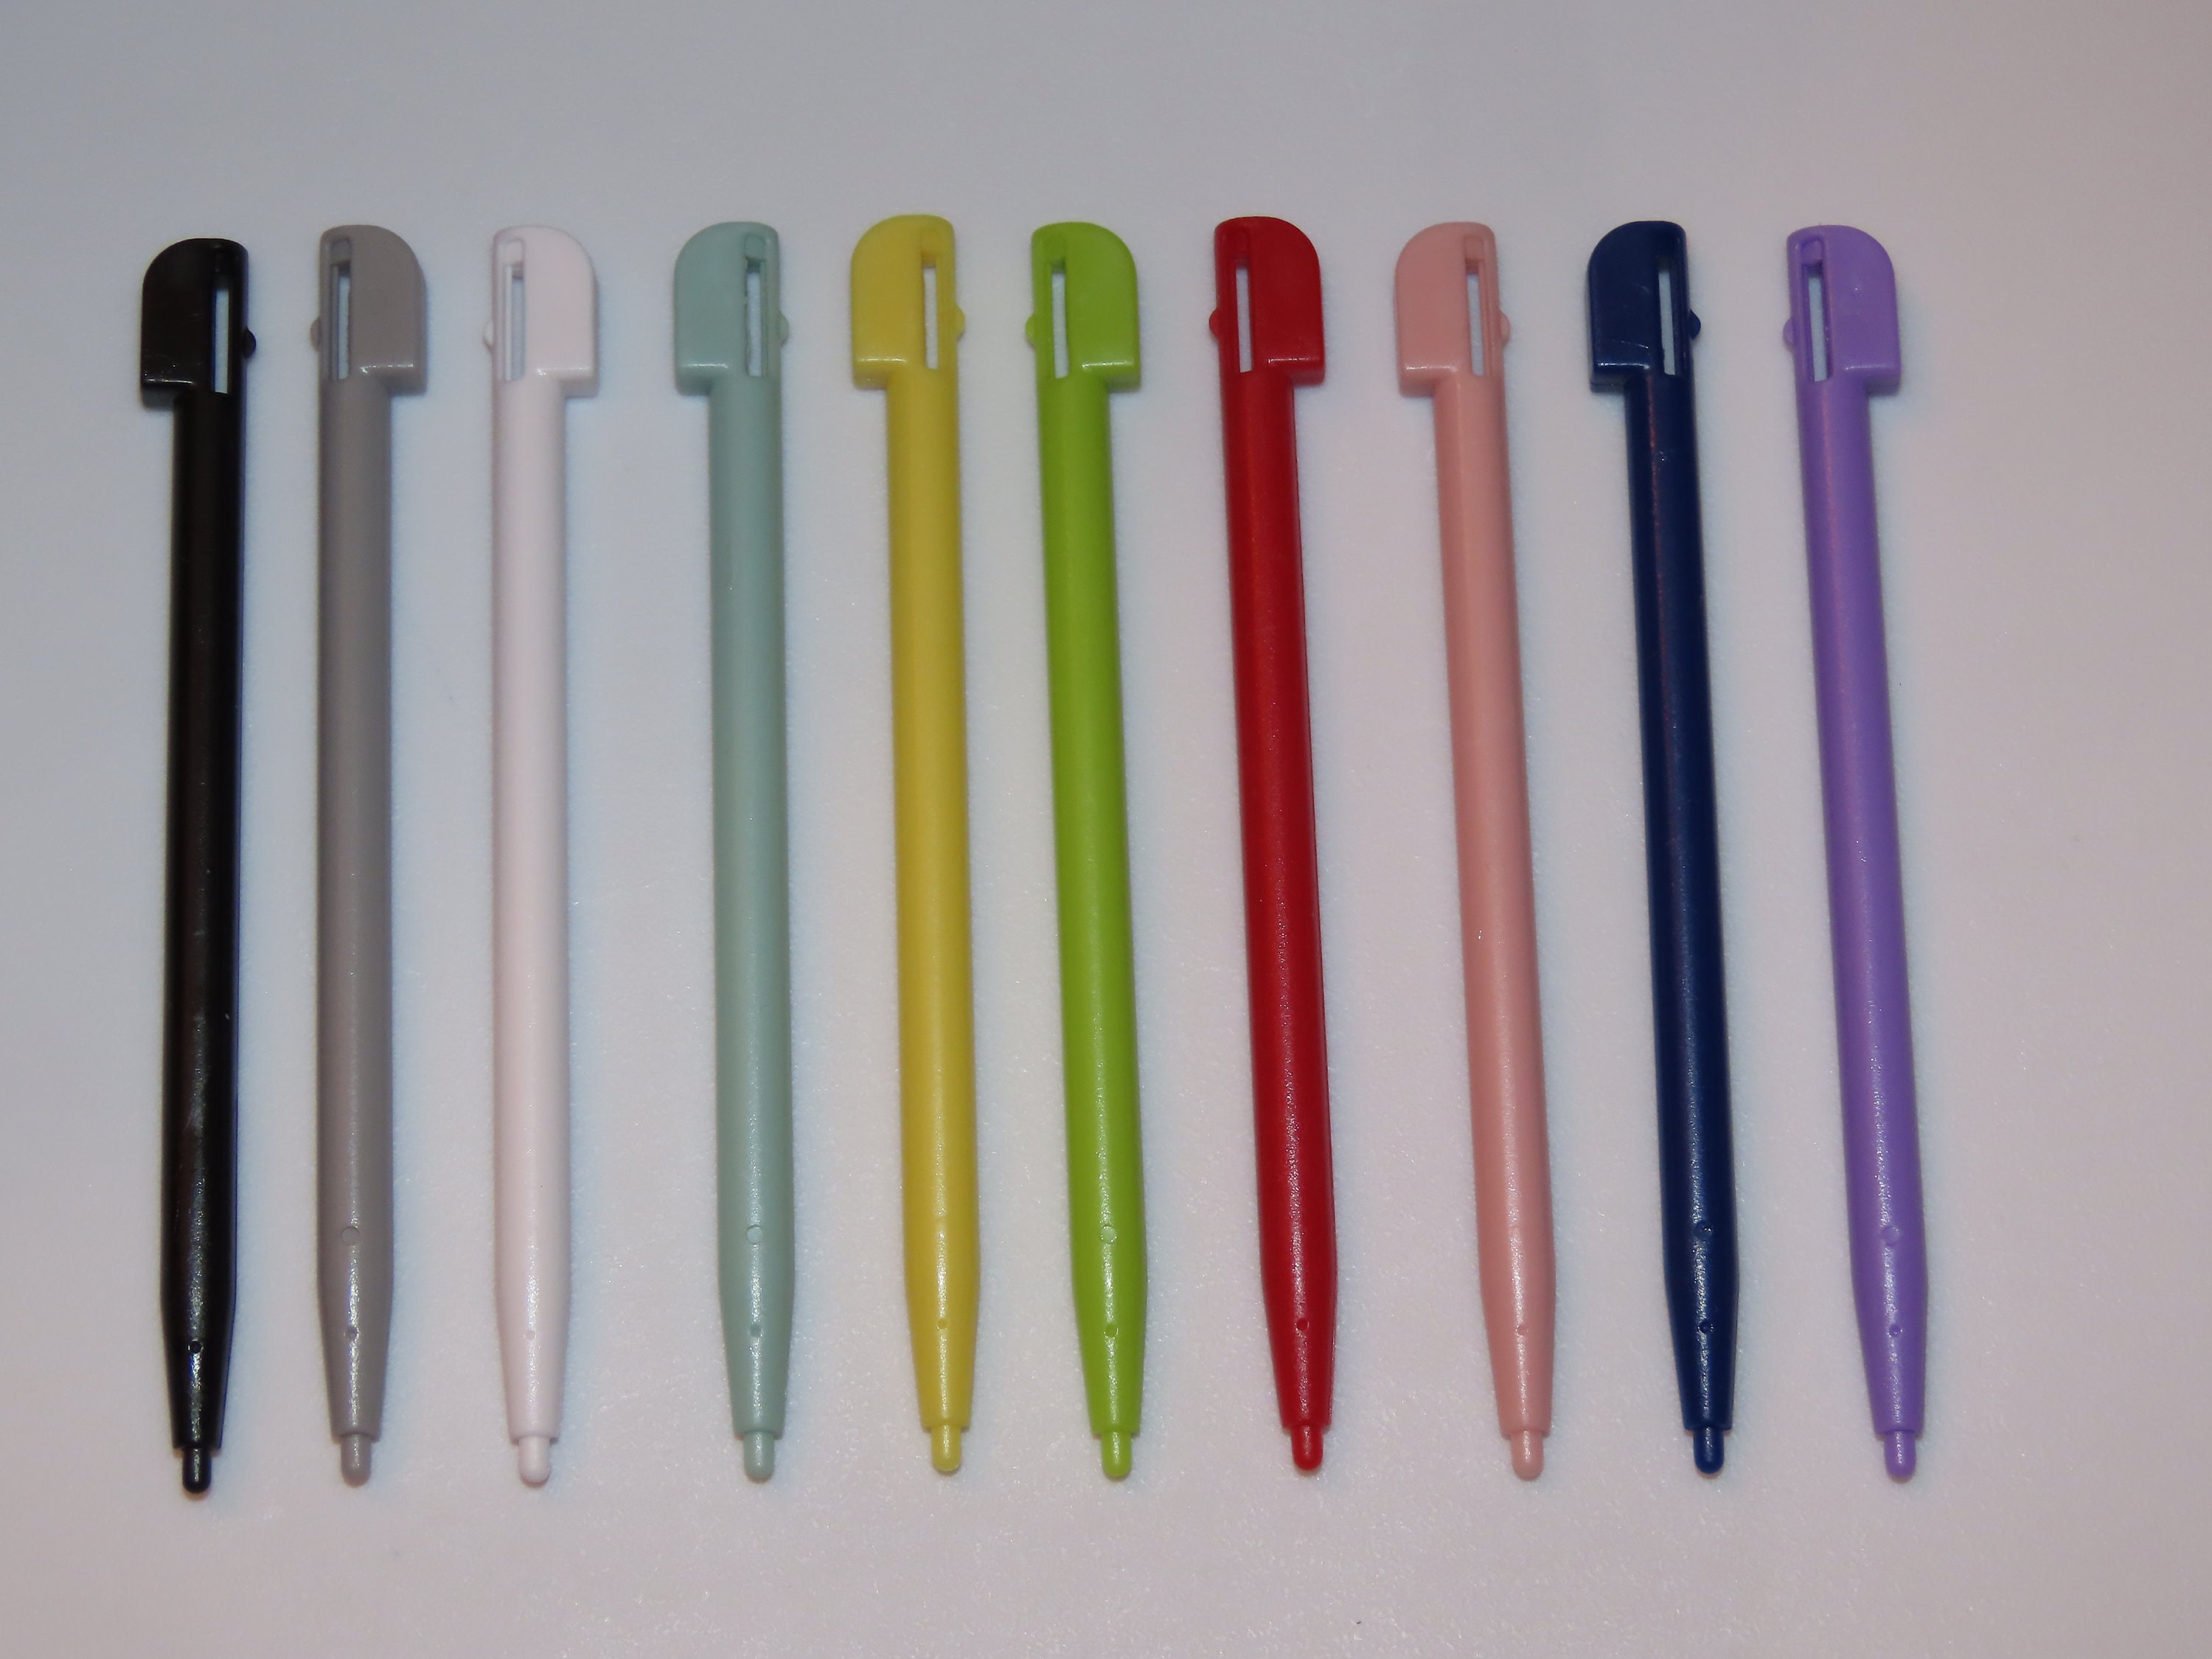 Pen only. Nintendo DS Stylus. Шариковая ручка лите. Nintendo DS Styluses Side by Side. Only Pen.